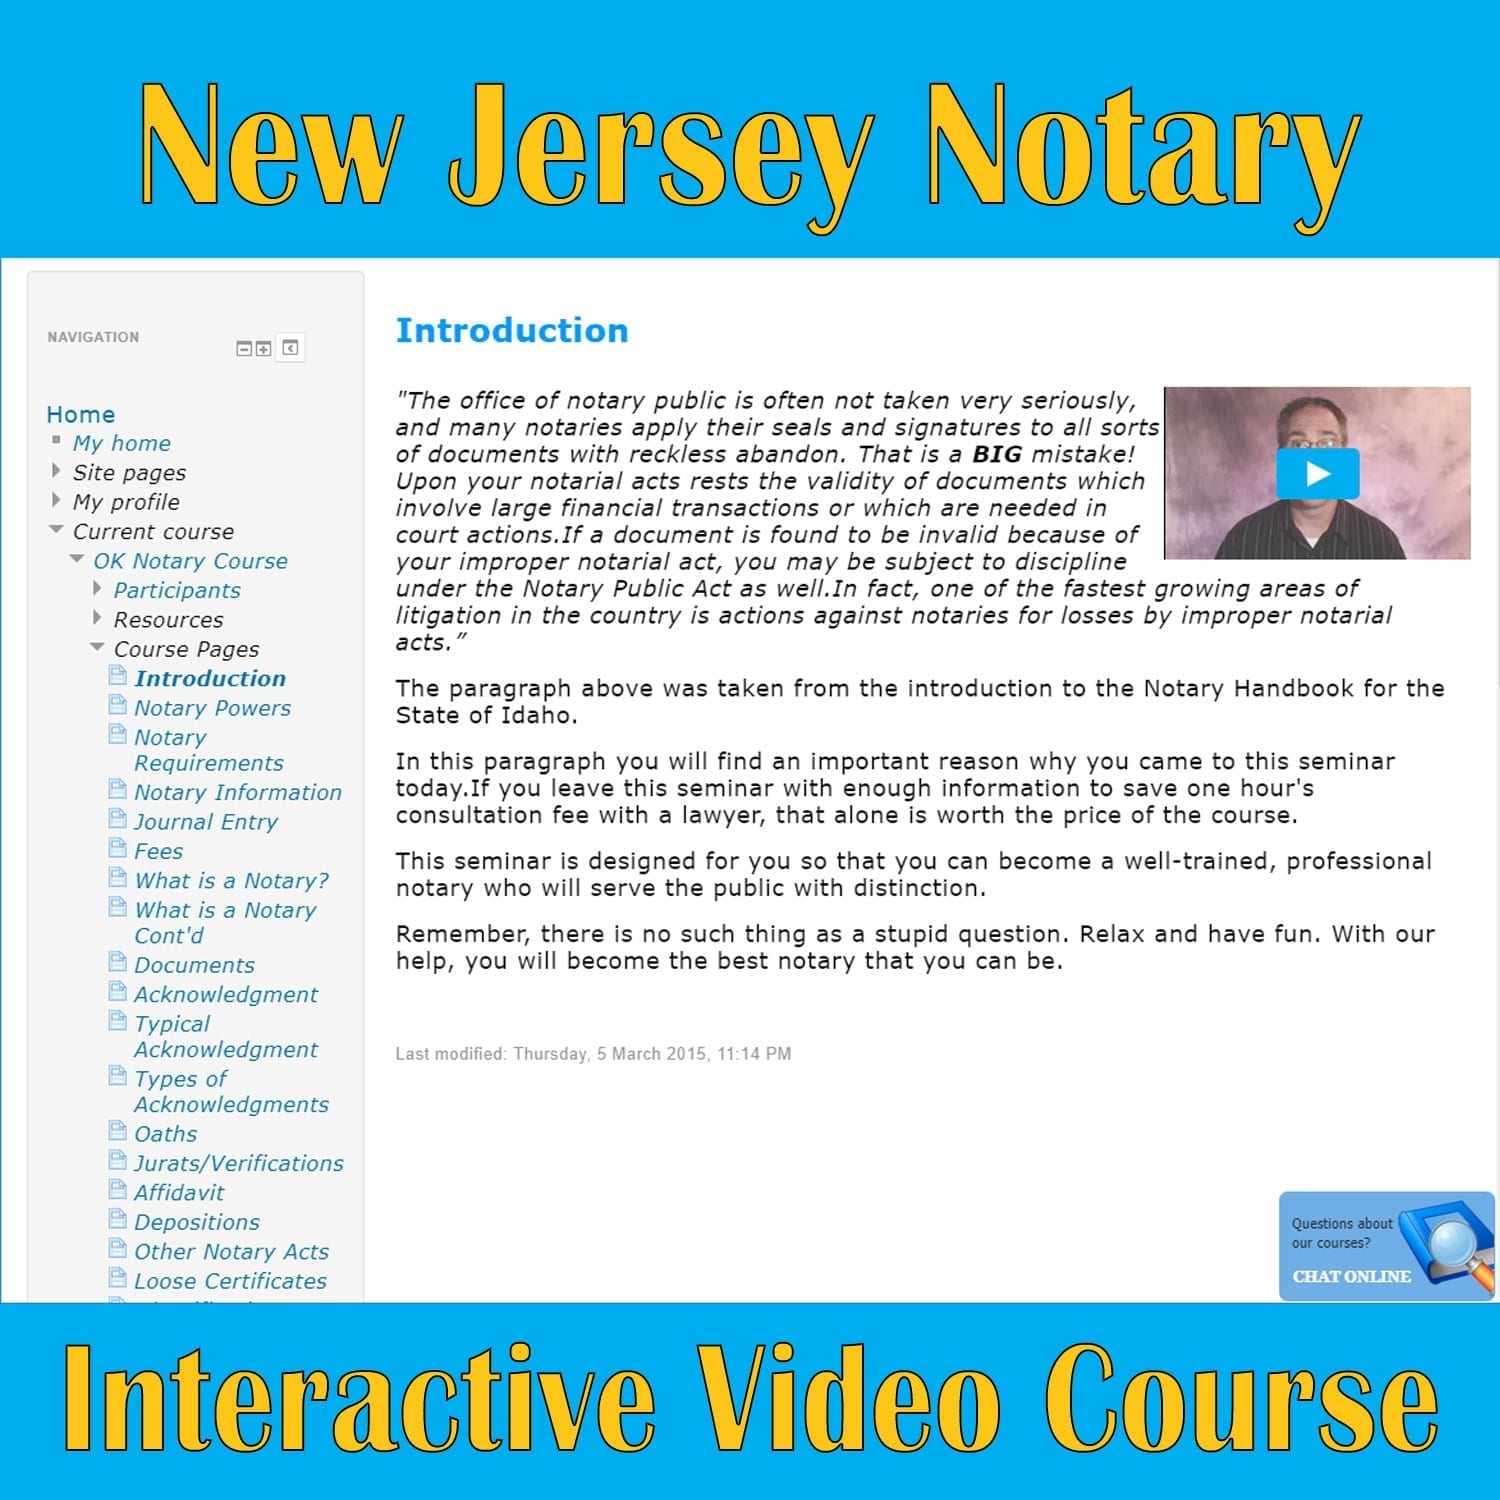 New Jersey Notary Online Course